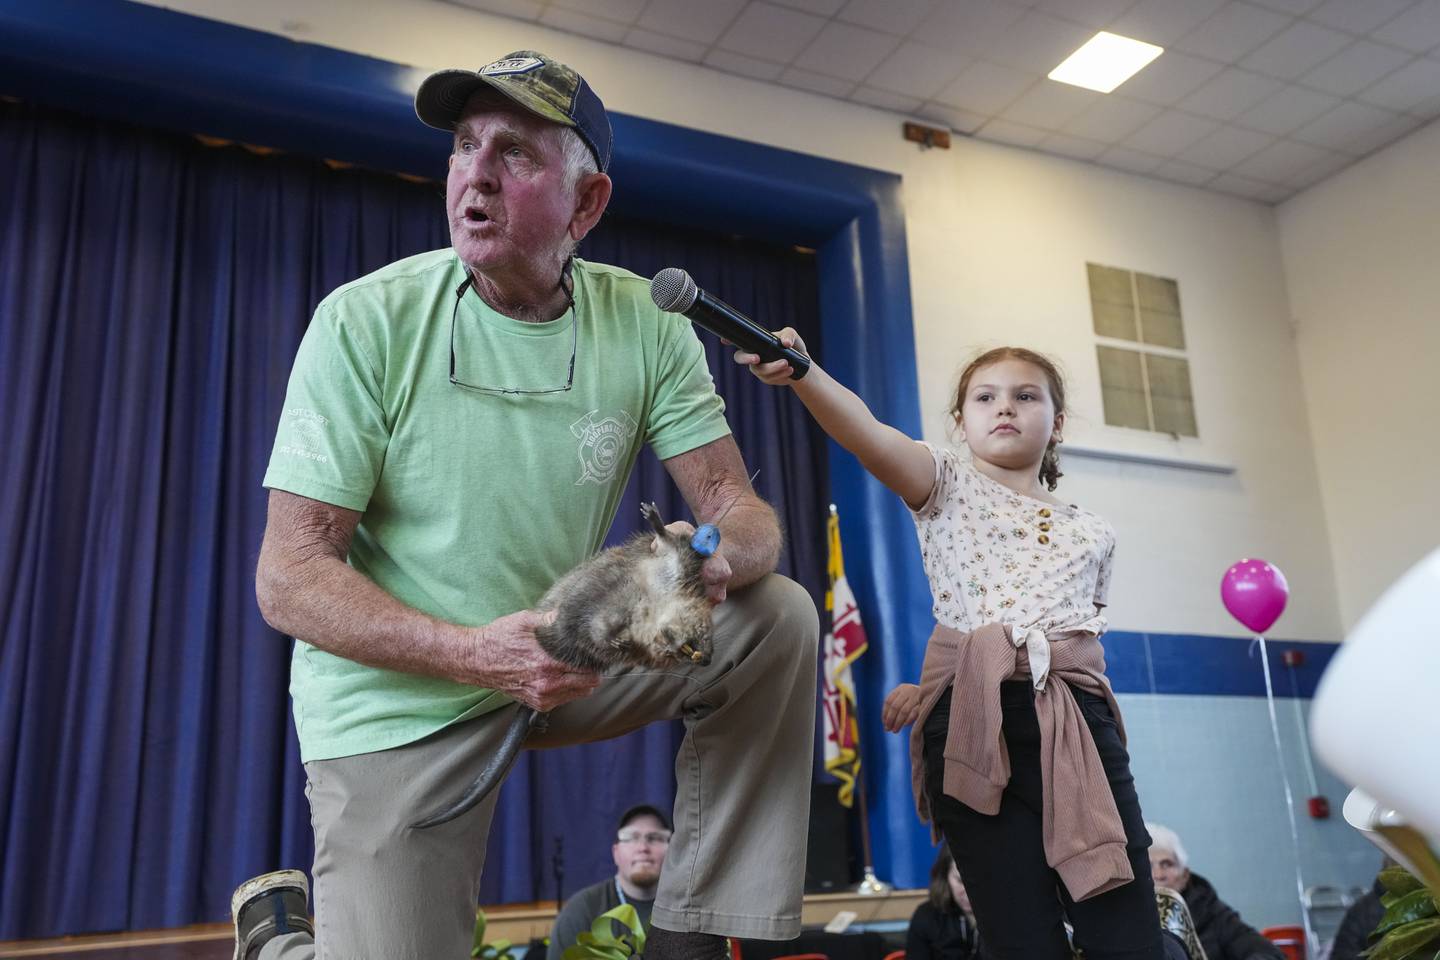 Kinsley Aaron, 10, holds the microphone for Buddy Flowers, 66, as he skins a muskrat for an audience explaining the process as he goes.